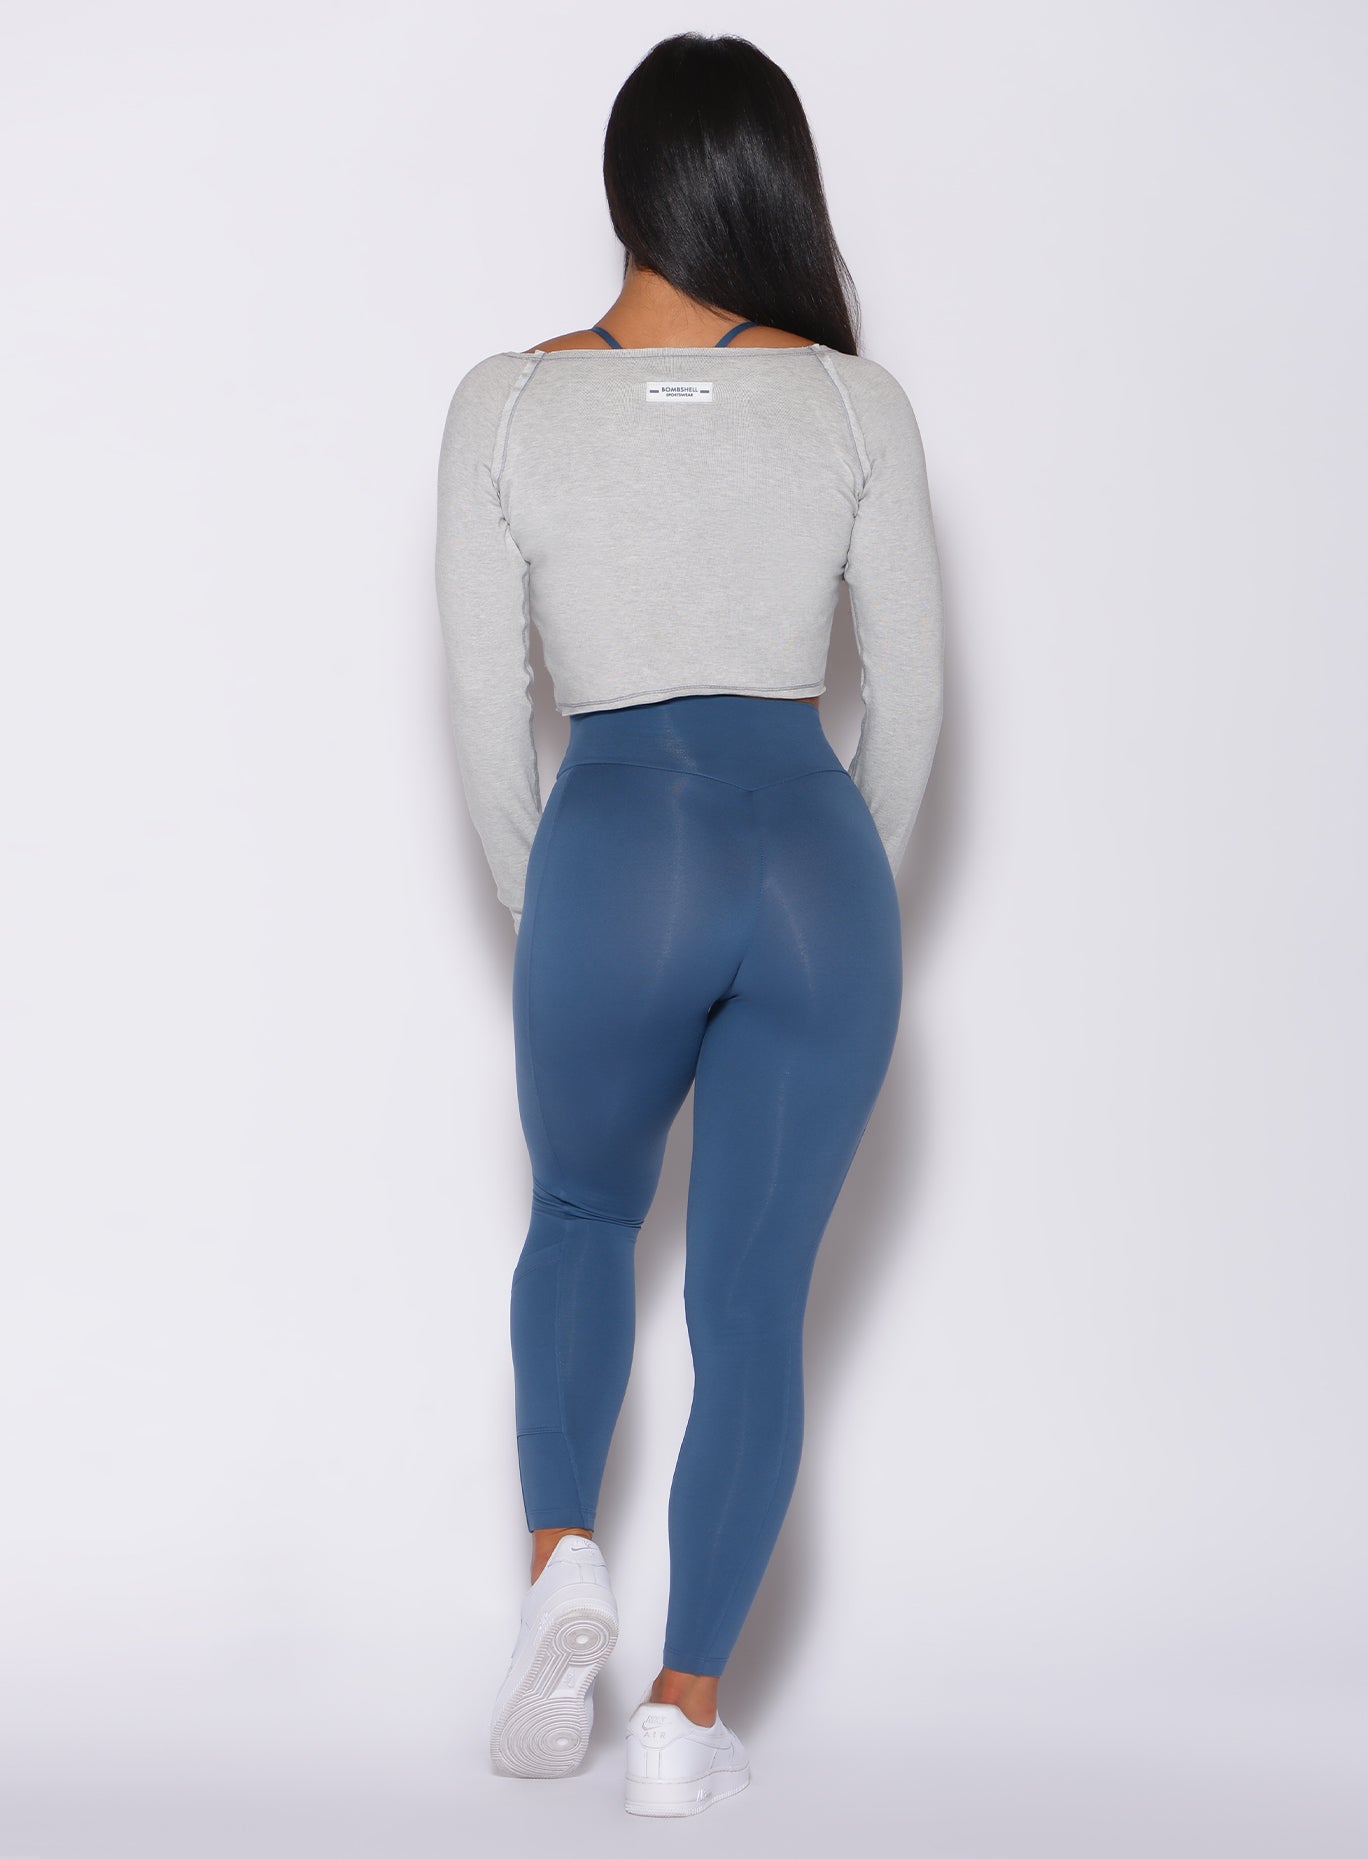 Back profile view of a model in our bamboo pullover in beach sand color and a blue leggings